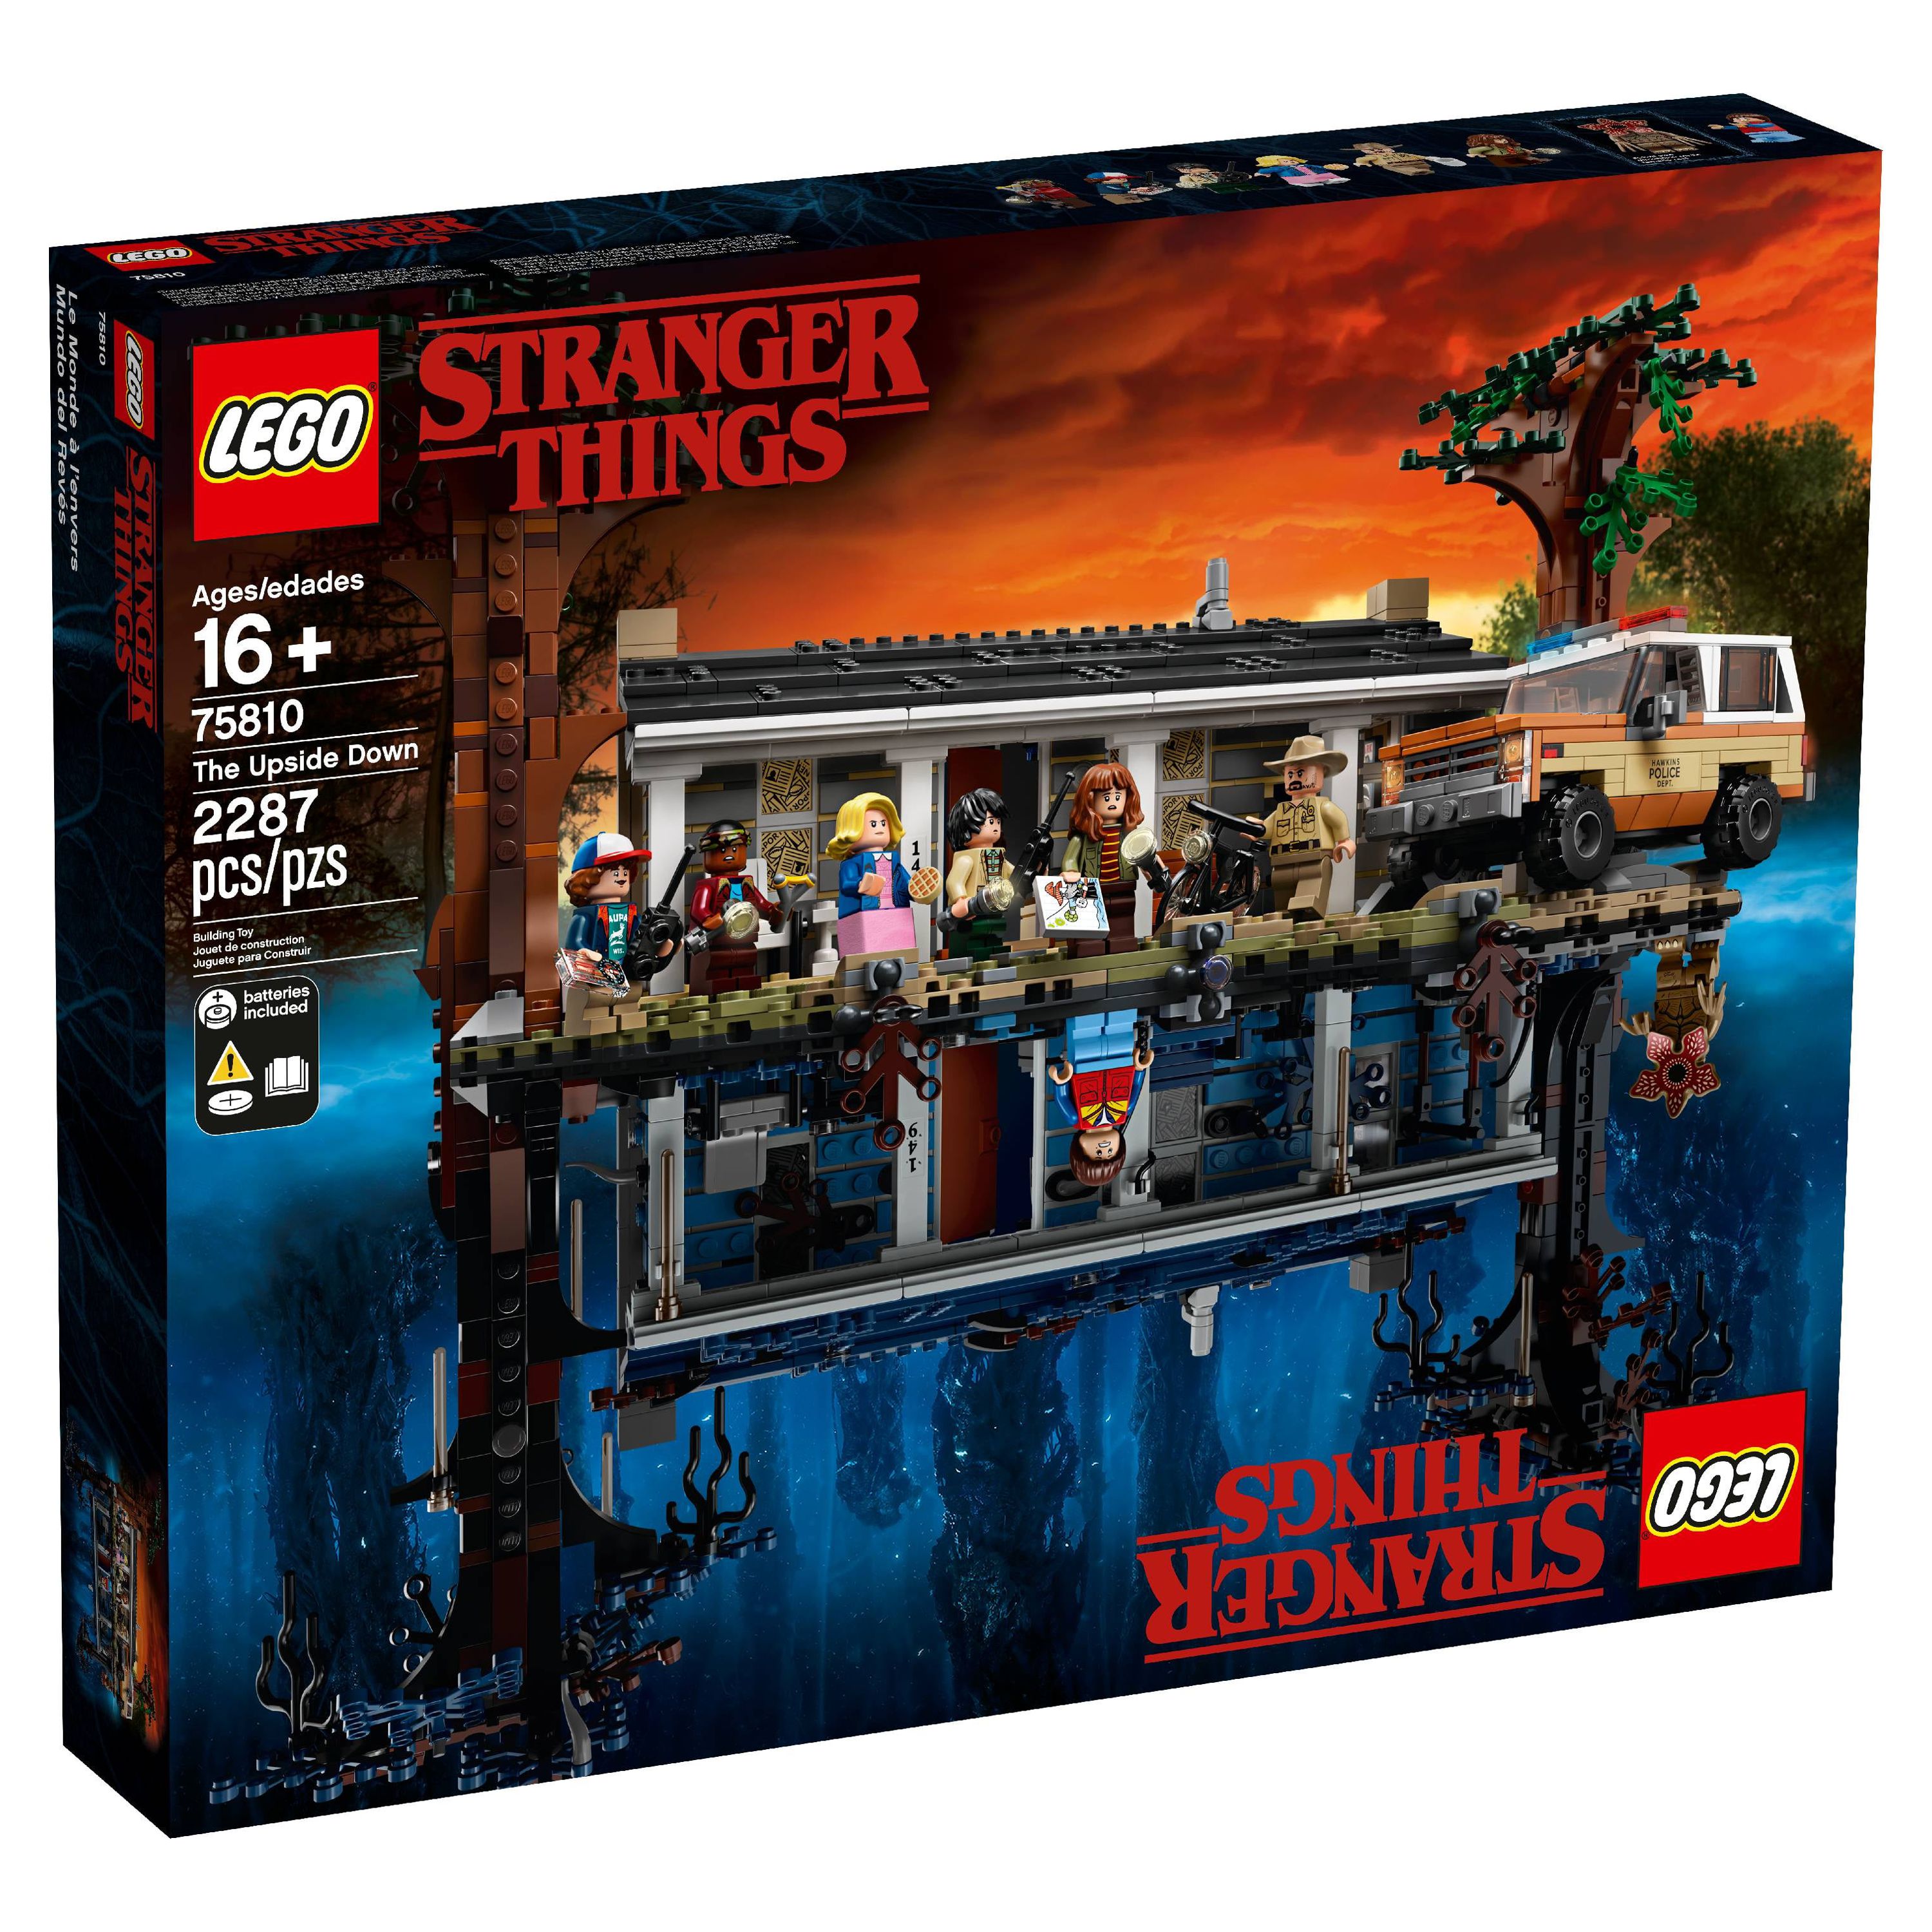 LEGO Stranger Things The Upside Down 75810 Building Kit (2,287 Pieces) - image 5 of 8